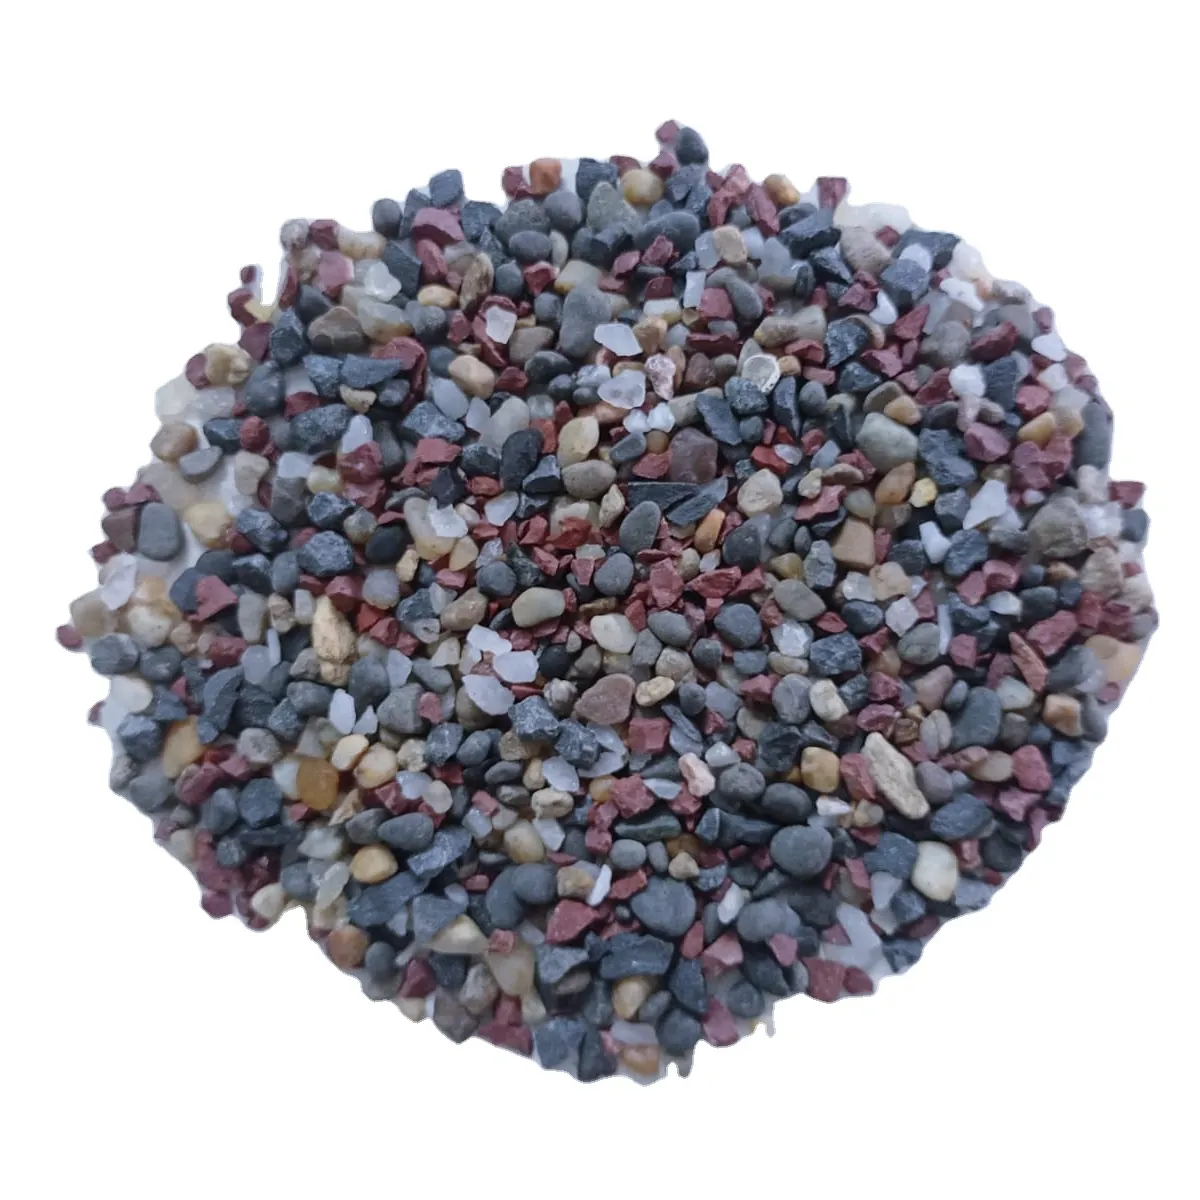 Aquarium fish tank for best 5 color mixer agate stone chips water wash round crushed stone gravels special smaller pebbles price